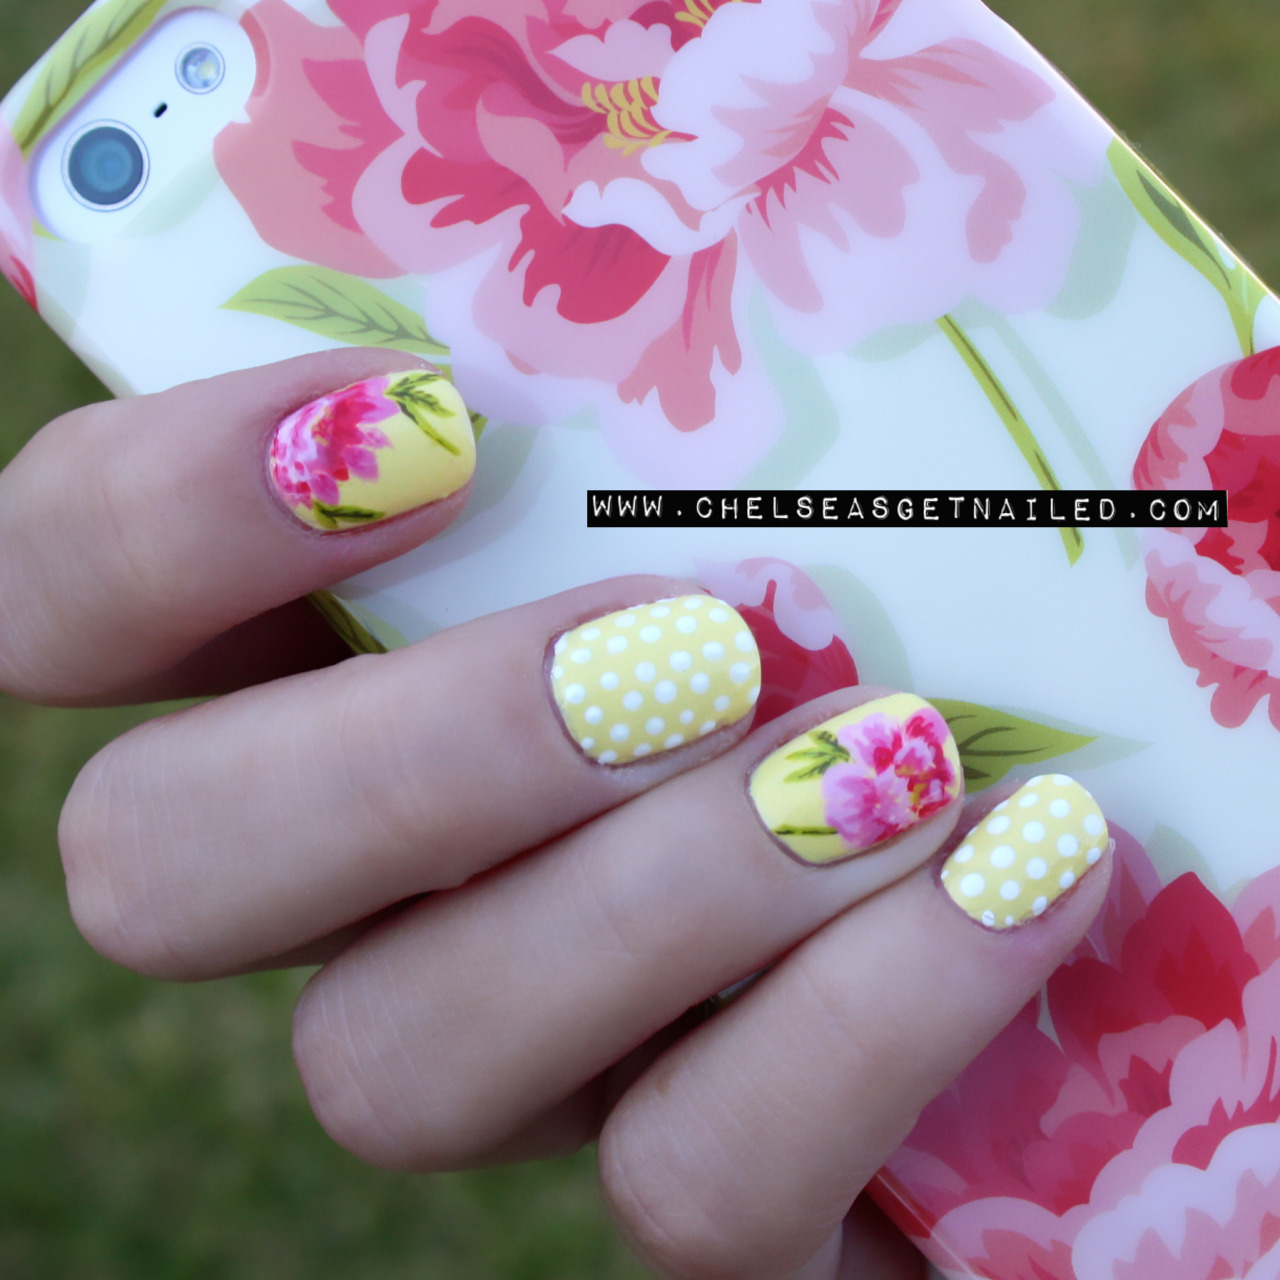 New nails inspired by this iPhone case
Blog post can be found here!